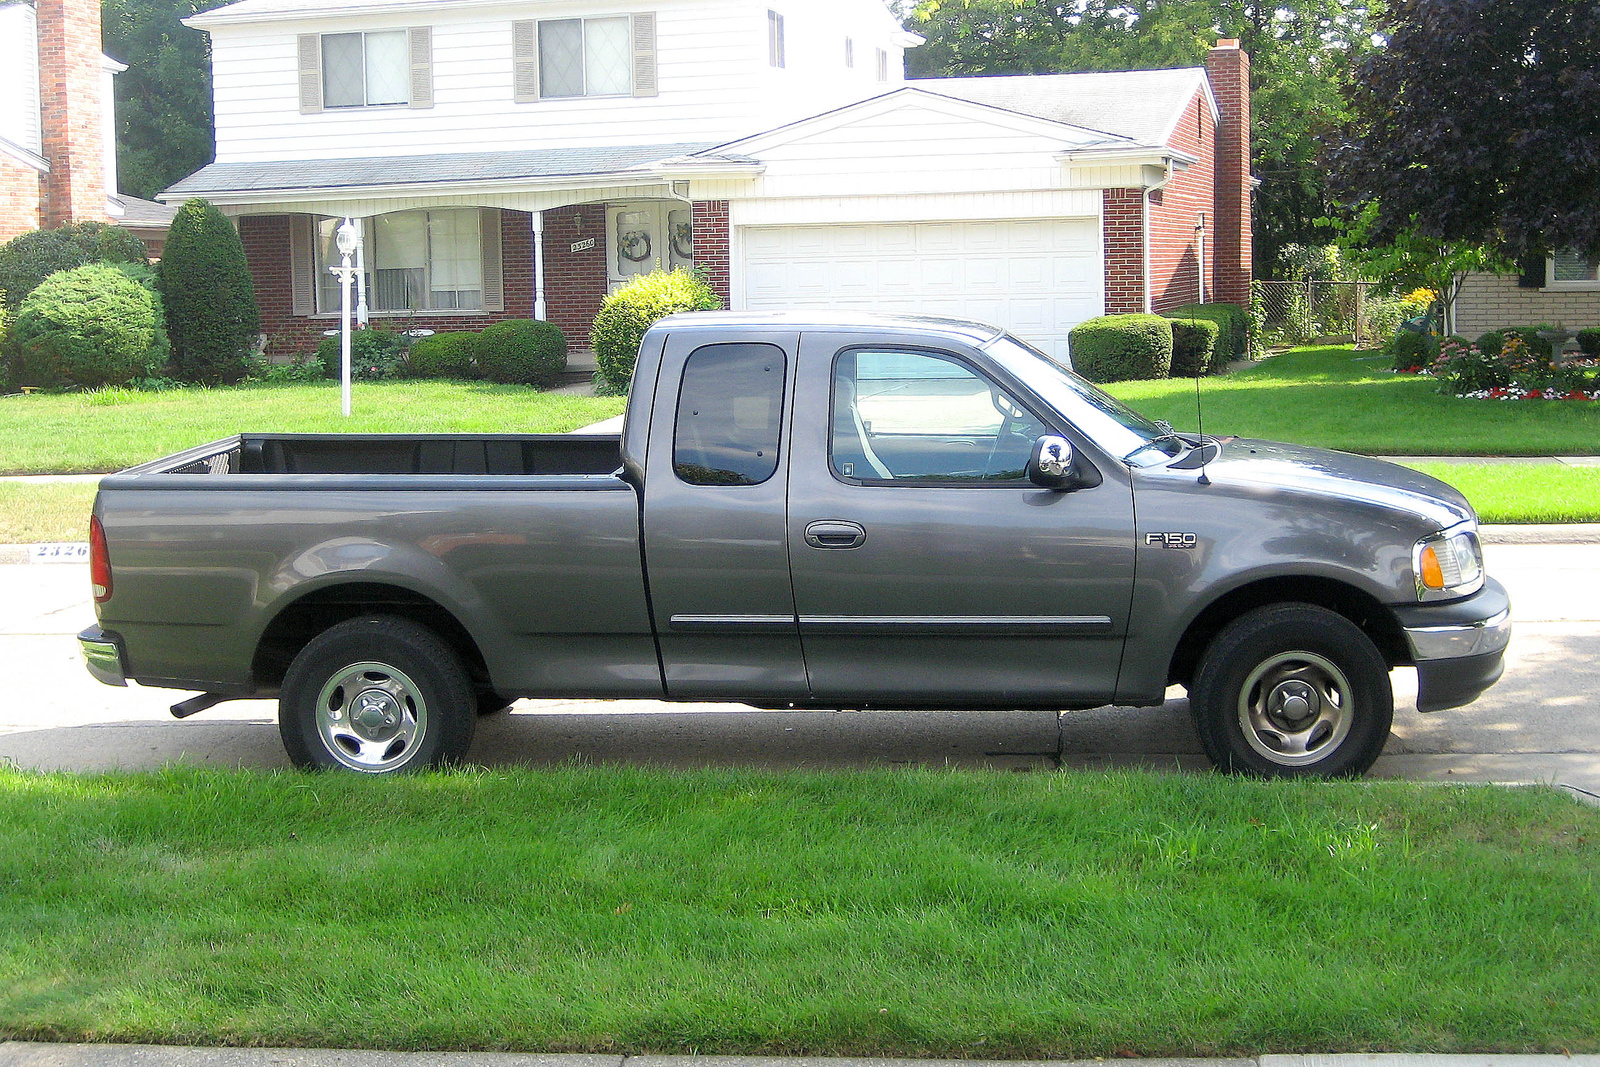 2002 Ford f150 extended cab #4